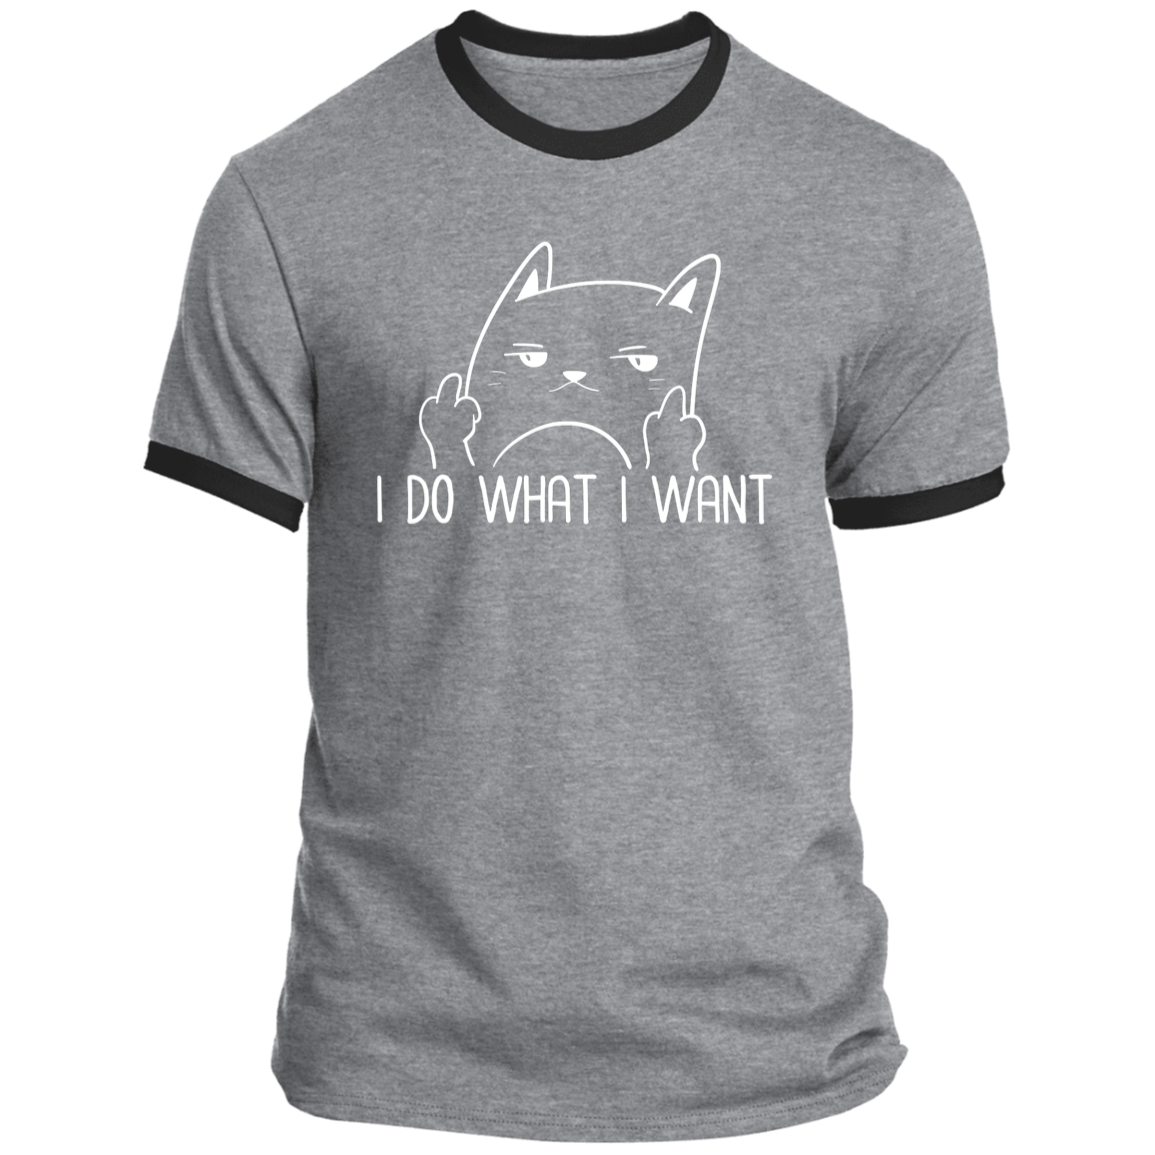 I Do What I Want Funny Ringer Tee